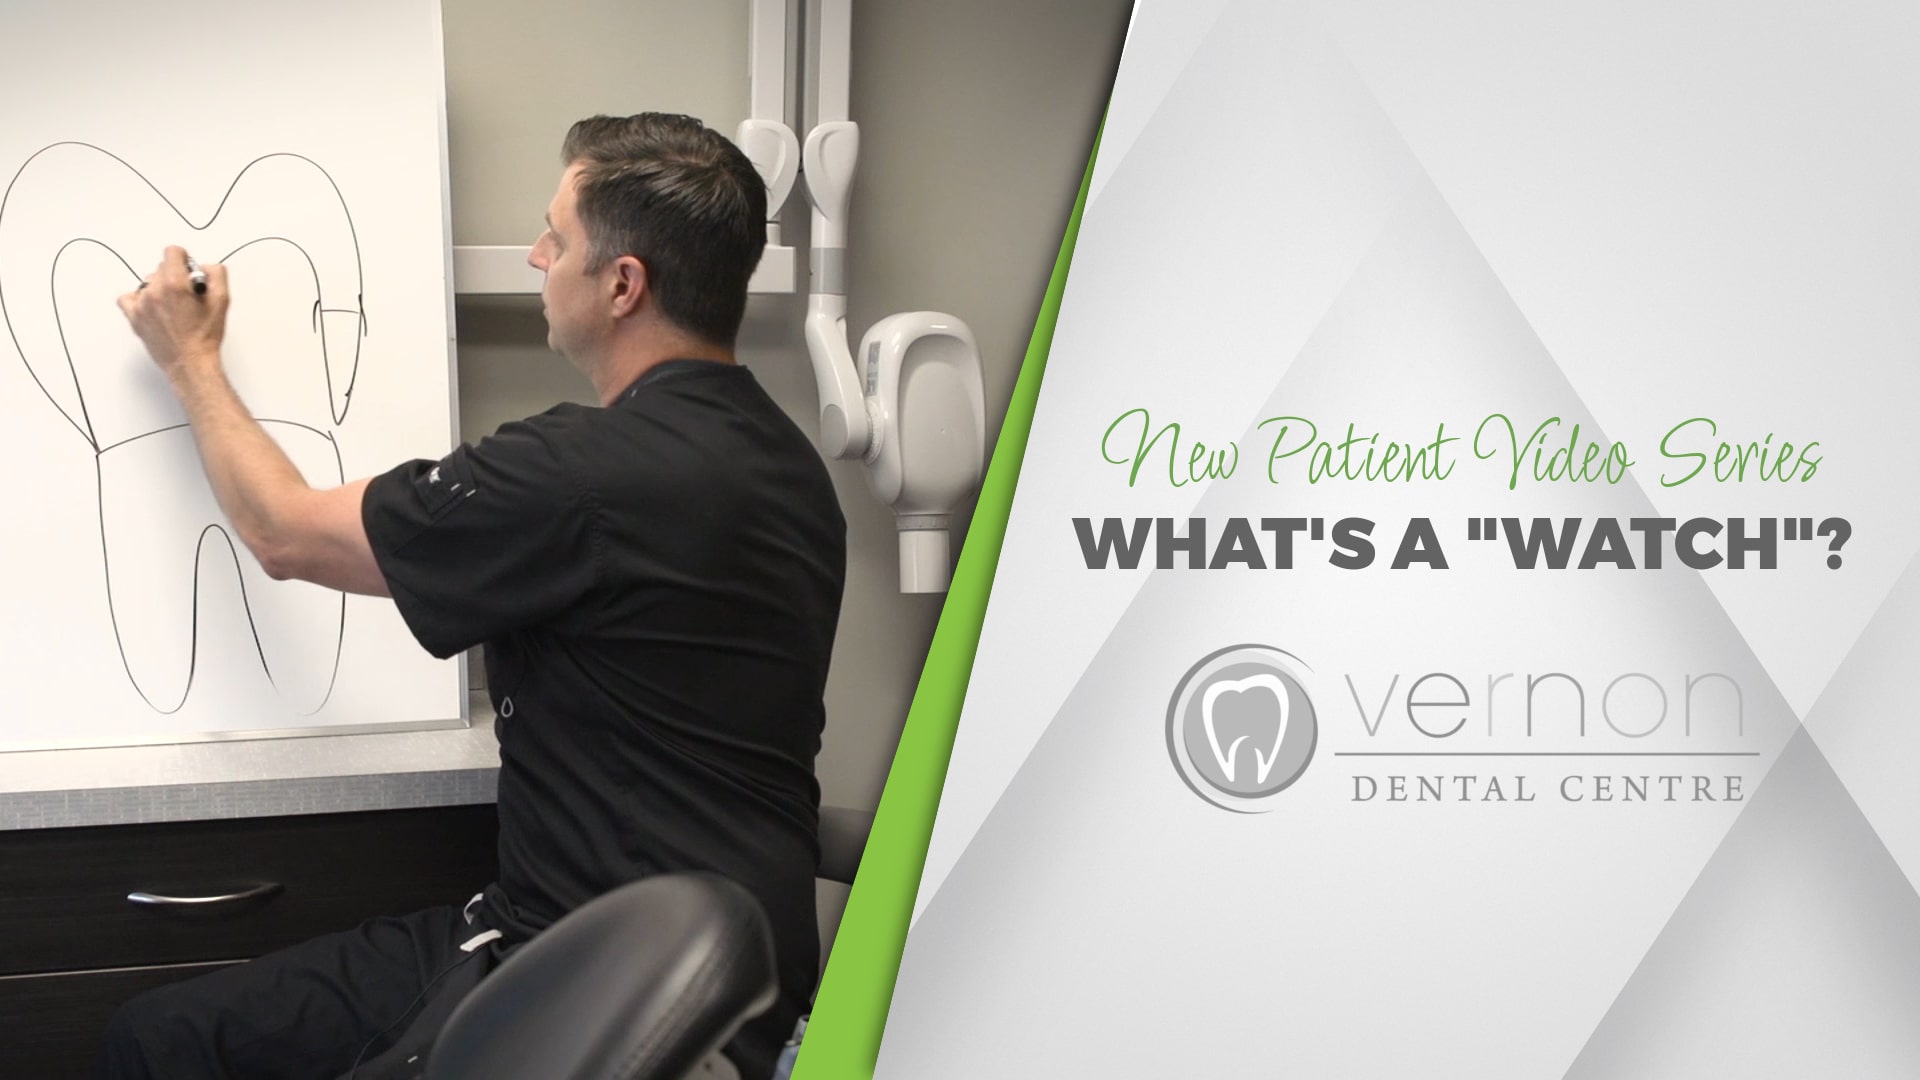 Dr. Anthony Berdan from Vernon Dental Centre discusses what it means when the dentist says there's a "watch" on your tooth